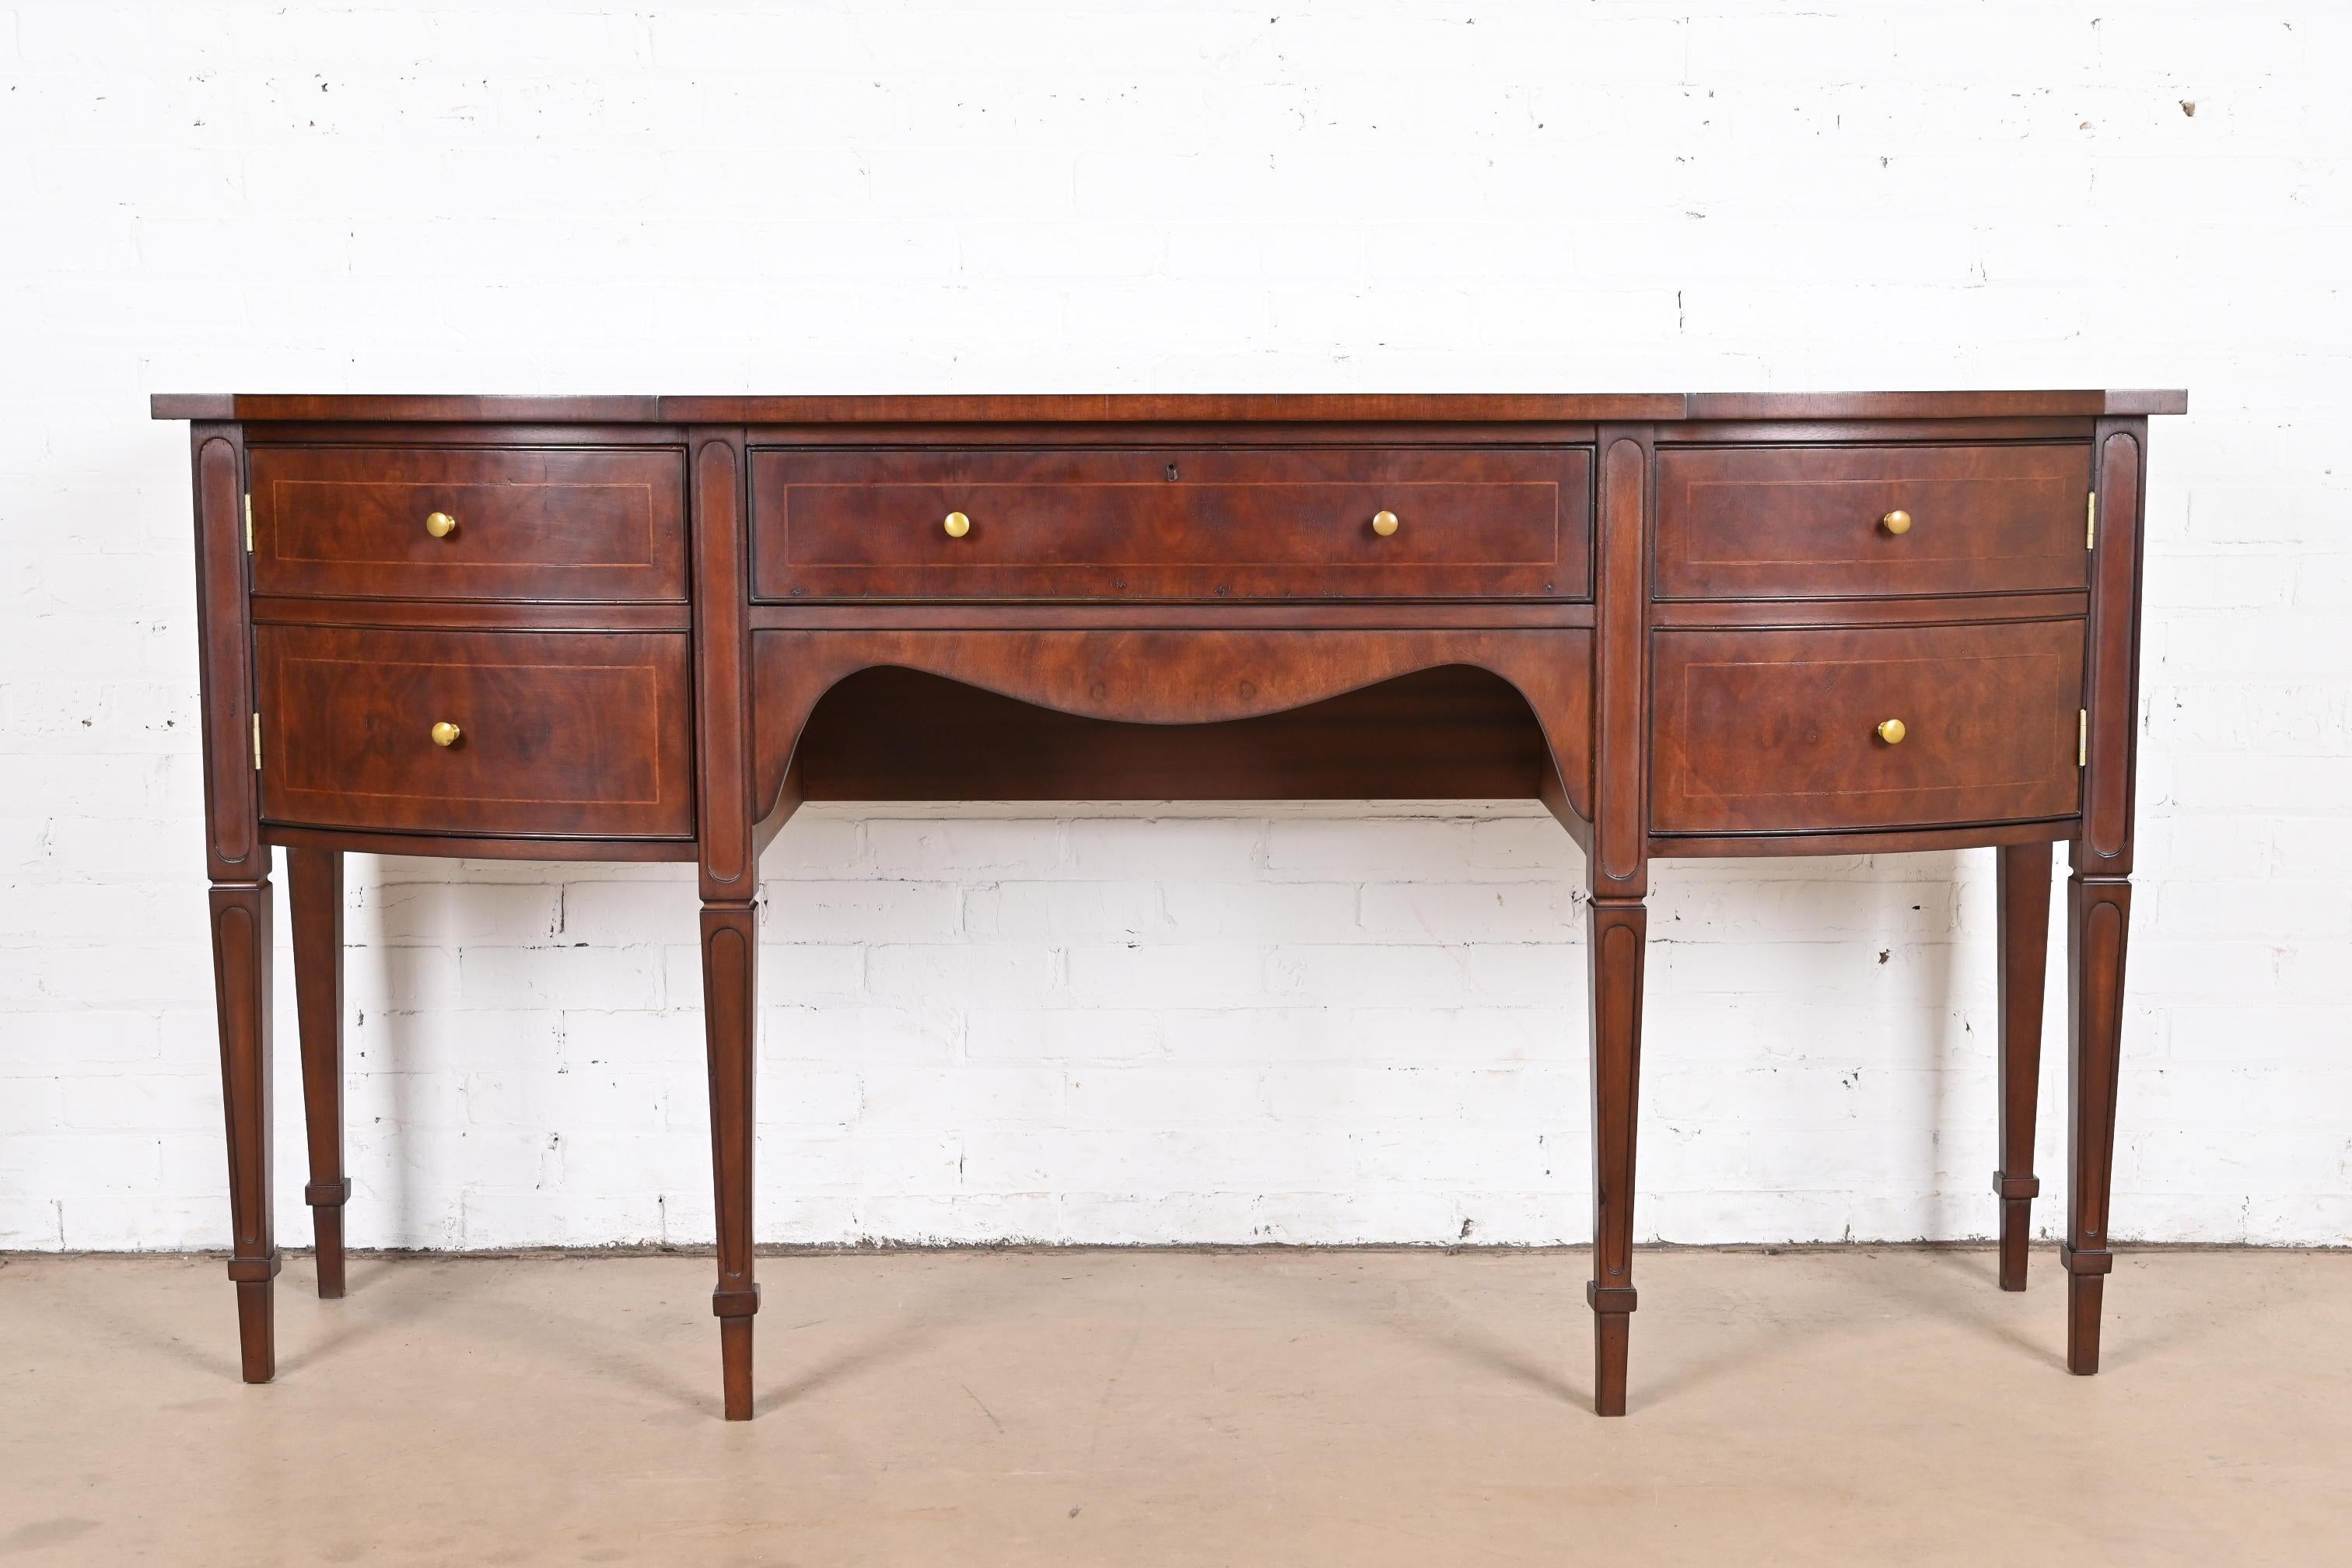 Georgian Baker Furniture Style Federal Inlaid Mahogany Sideboard Credenza For Sale